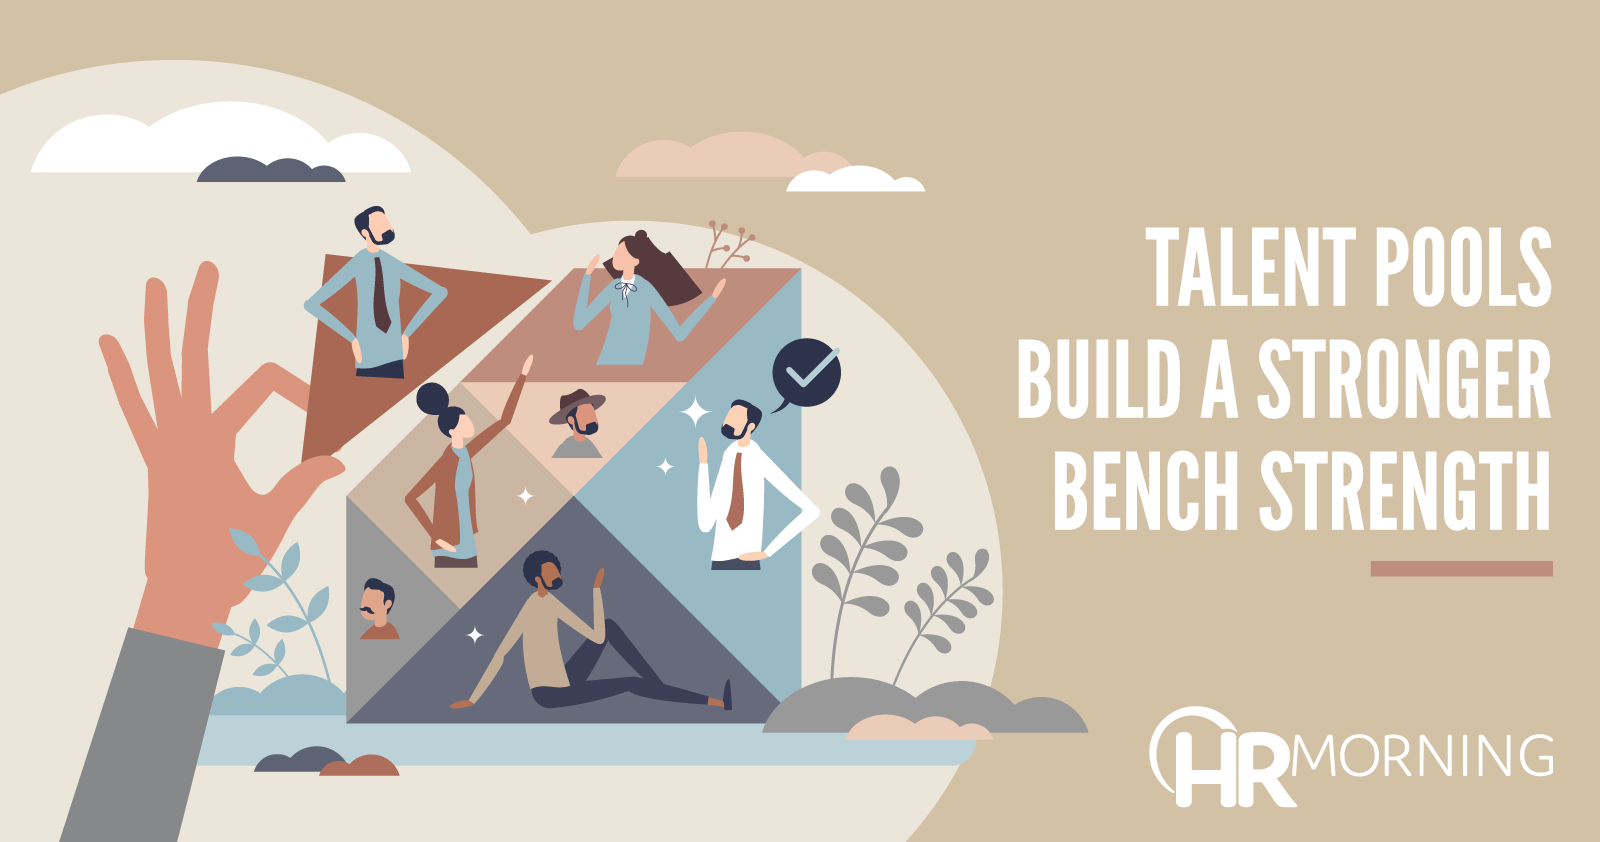 Talent pools build a stronger bench strength